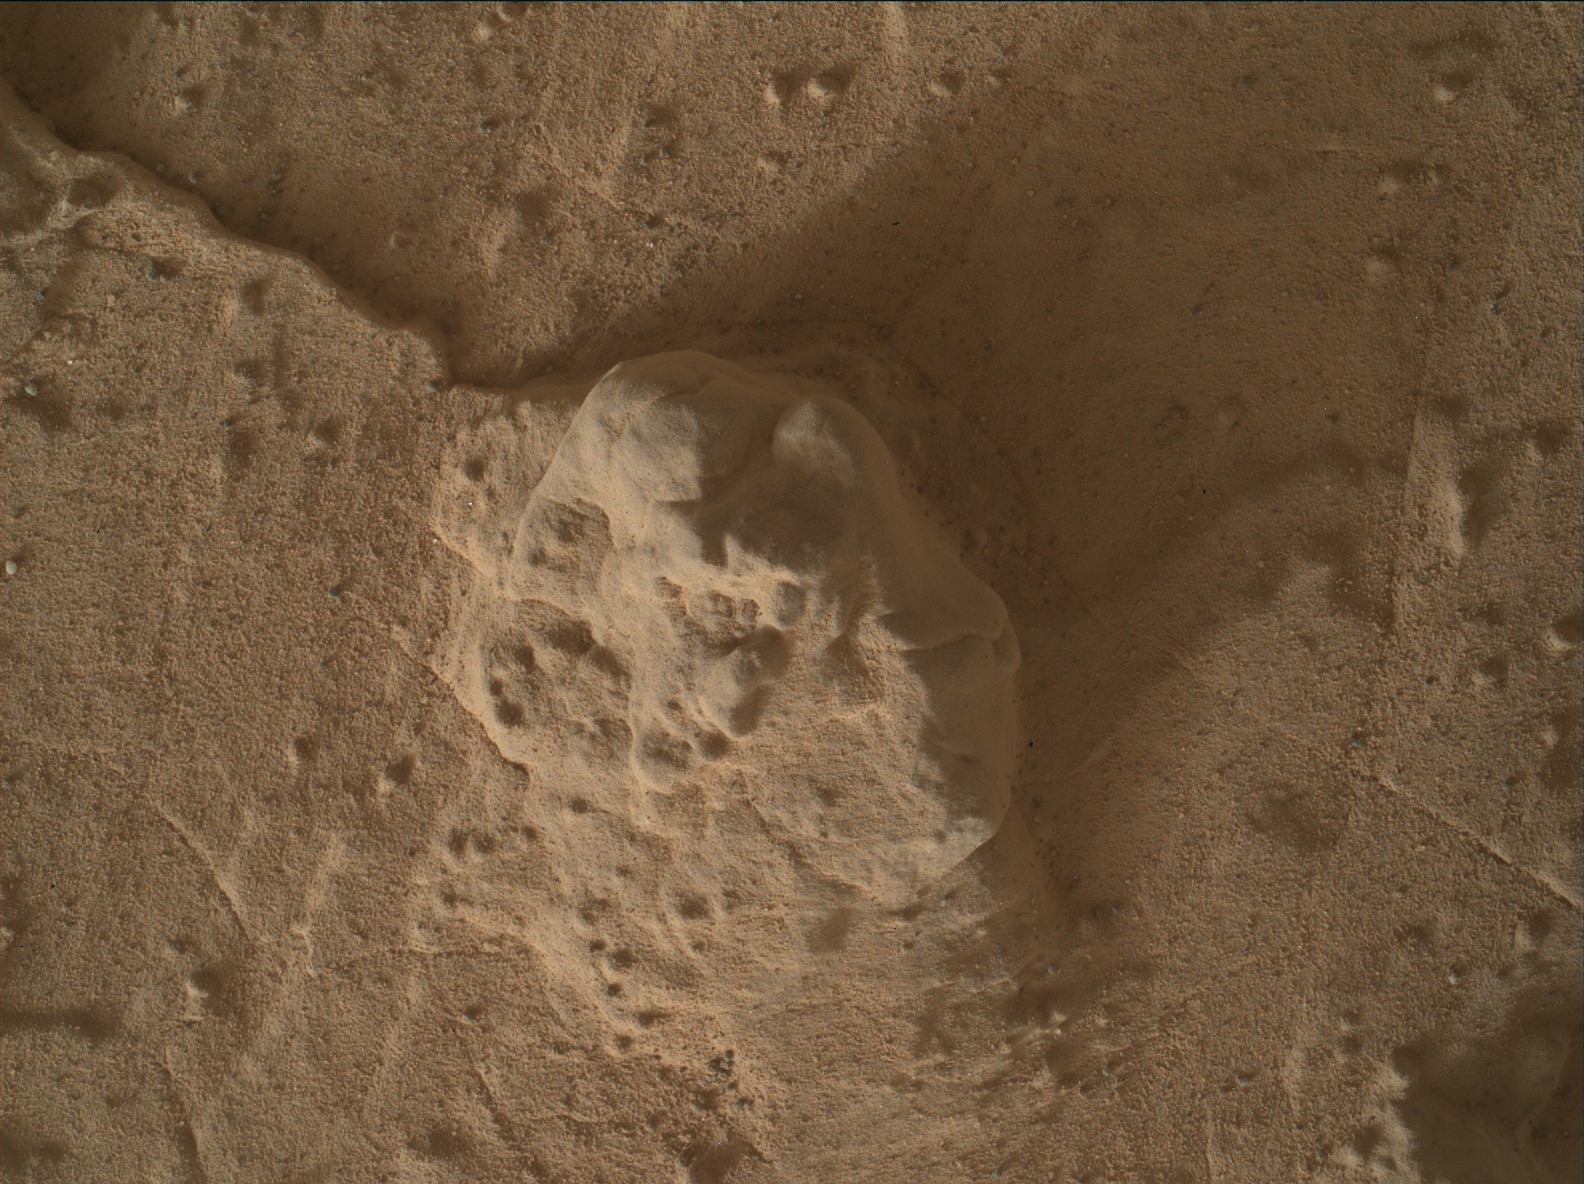 Nasa's Mars rover Curiosity acquired this image using its Mars Hand Lens Imager (MAHLI) on Sol 3052